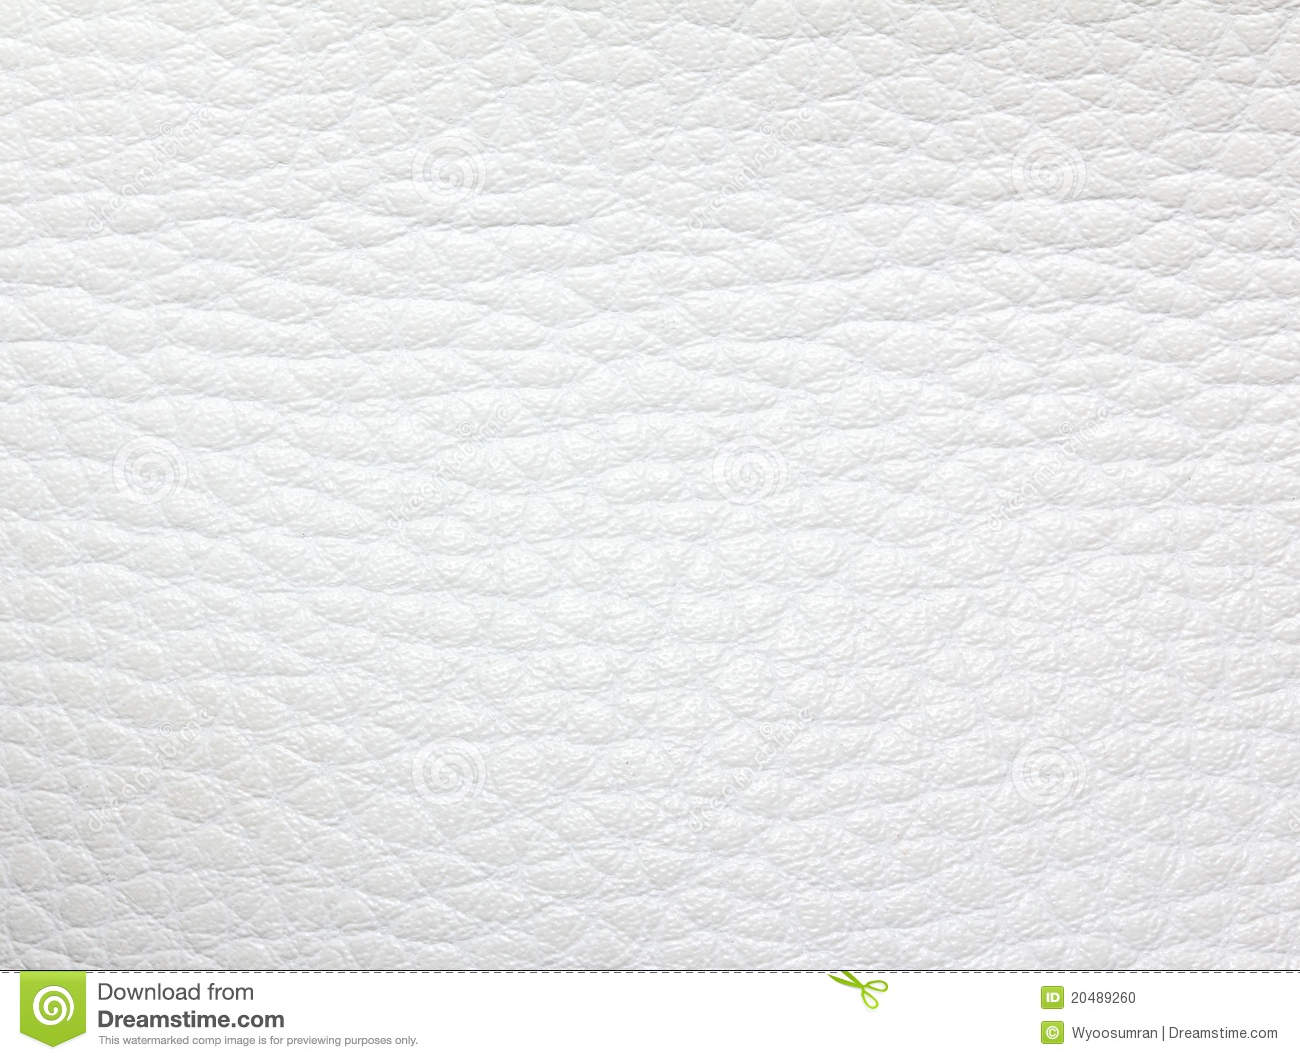 White Leather Wallpaper Hd White leather close up